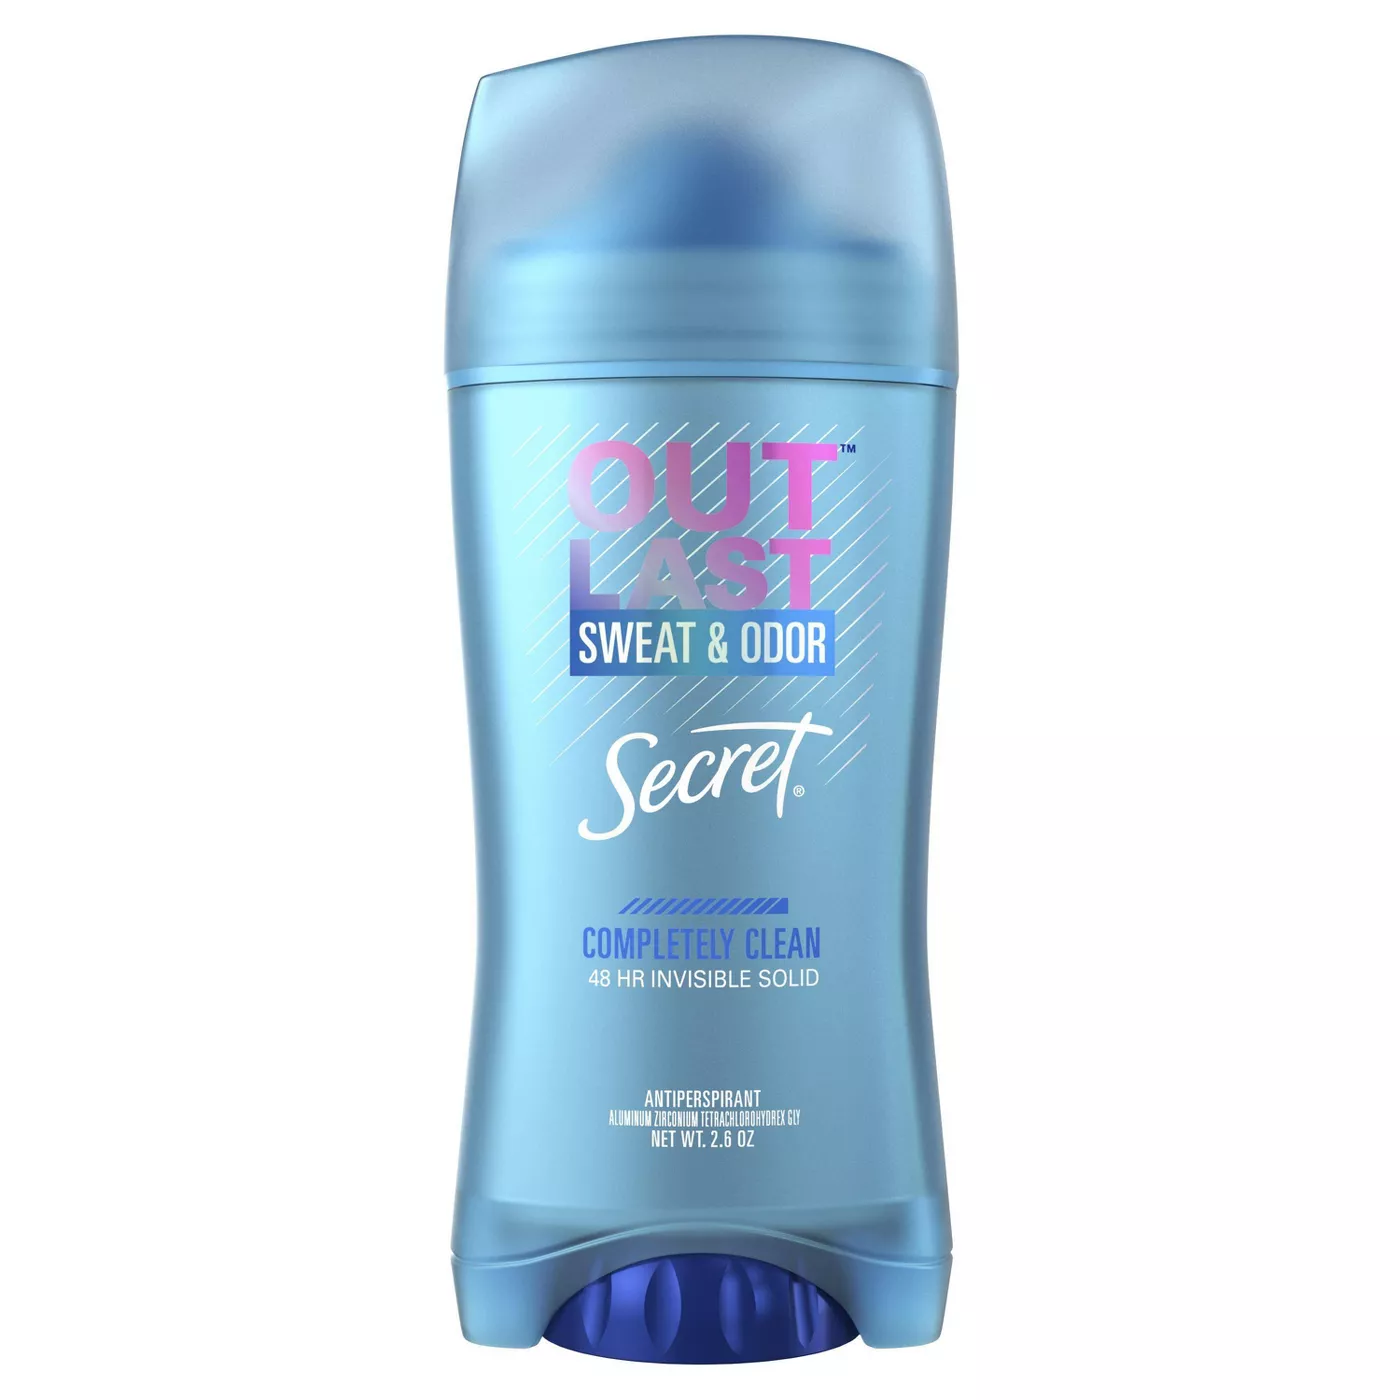 Secret Outlast Invisible Solid Antiperspirant & Deodorant for Women Completely Clean - 2.6 oz - image 1 of 2